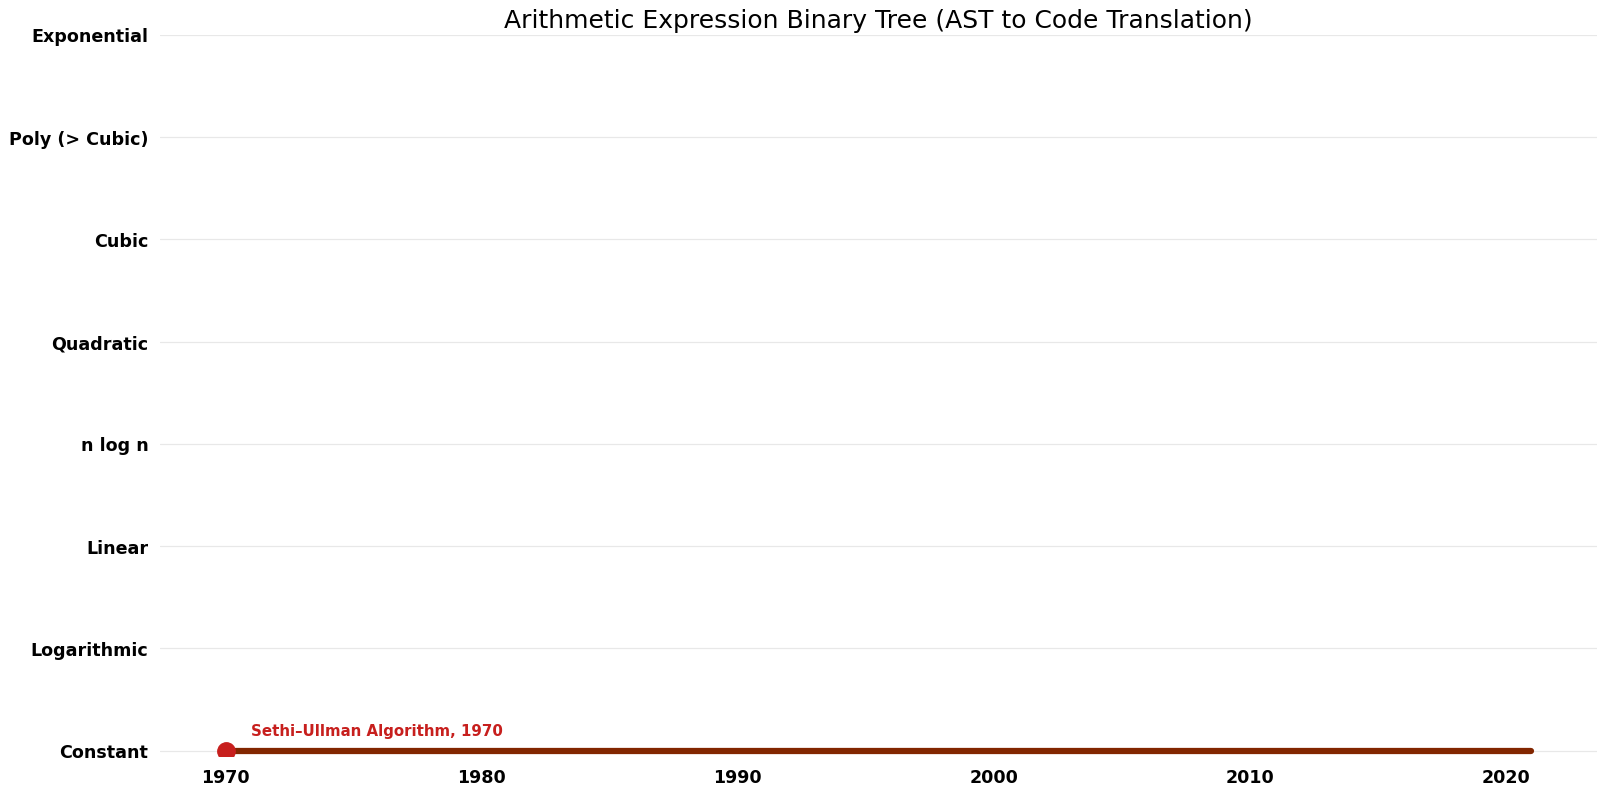 File:AST to Code Translation - Arithmetic Expression Binary Tree - Space.png